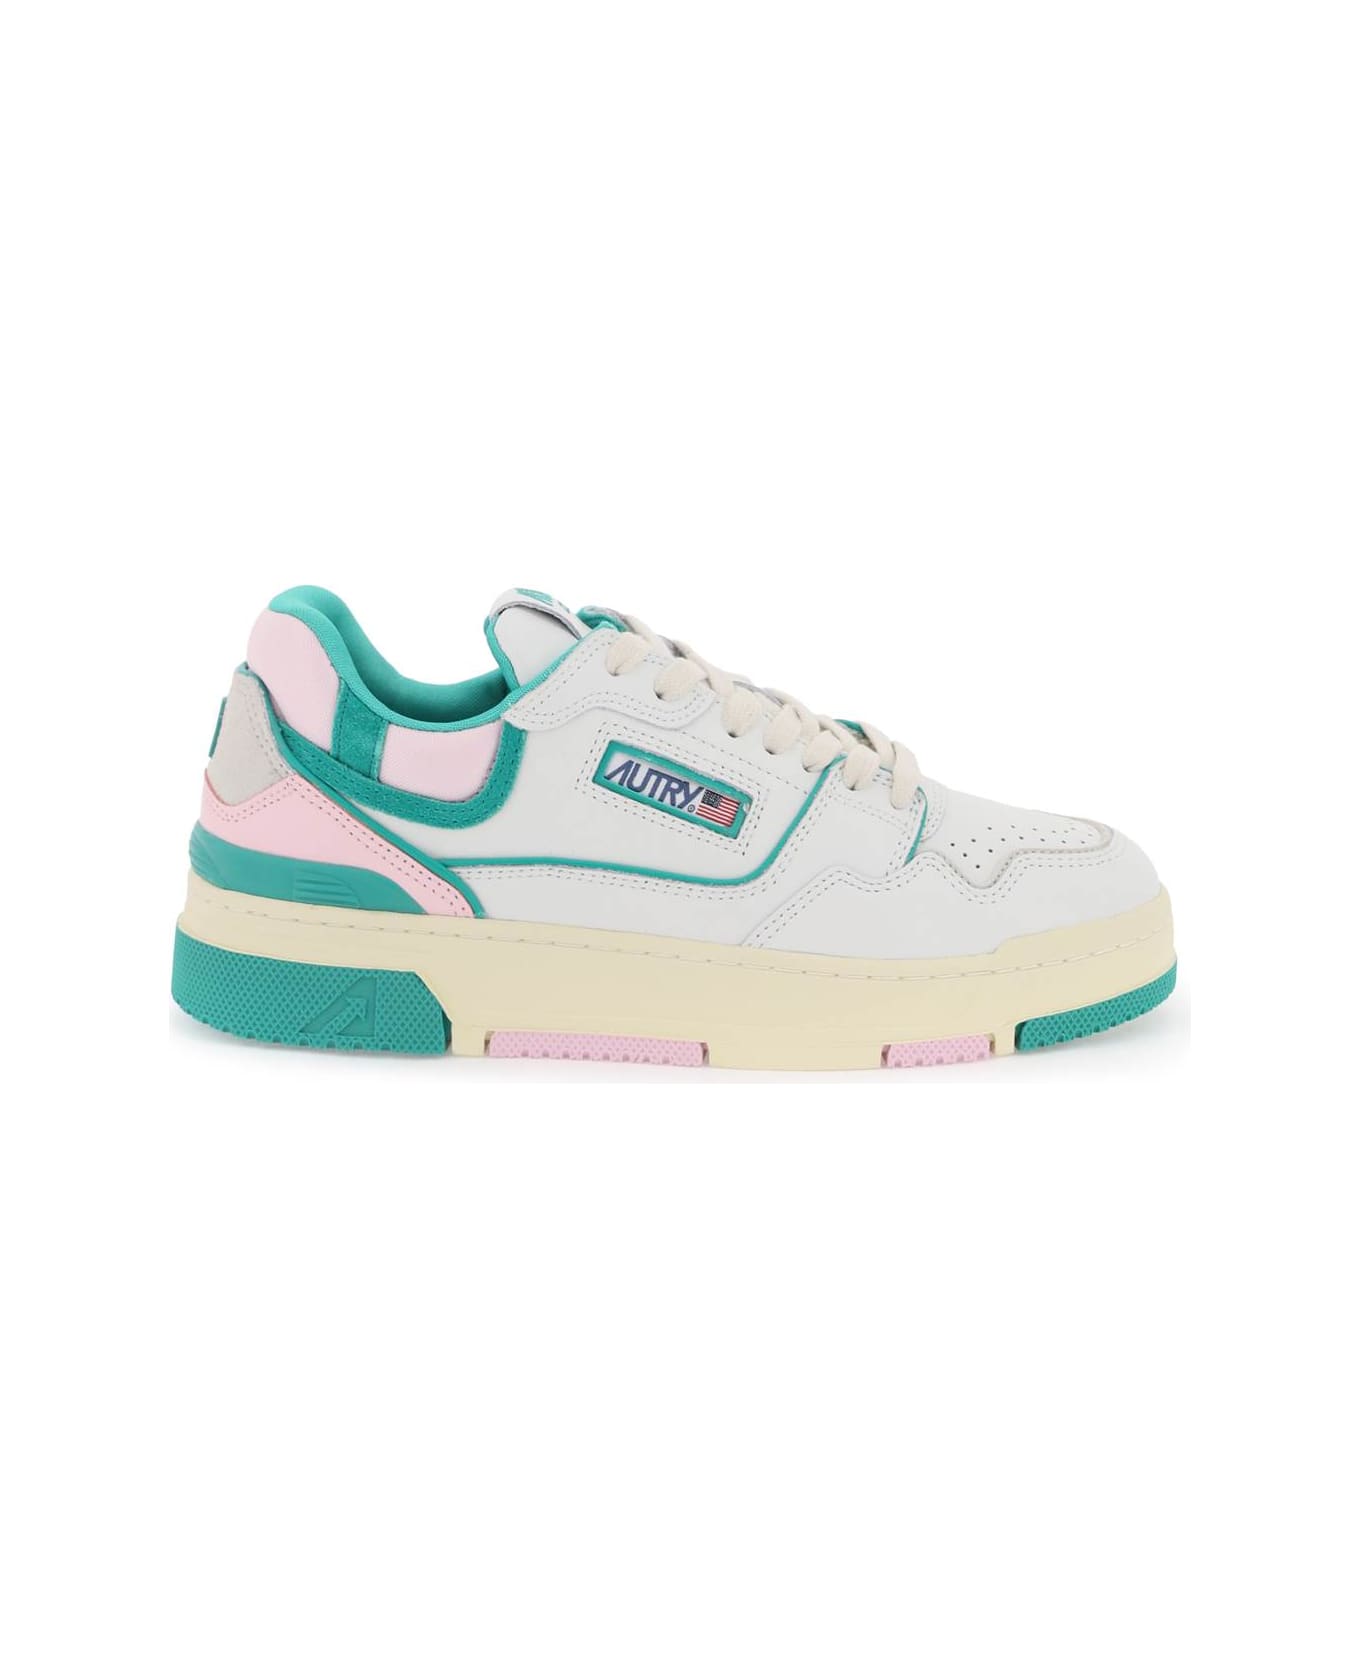 Autry Clc Sneakers In White And Green Leather - White